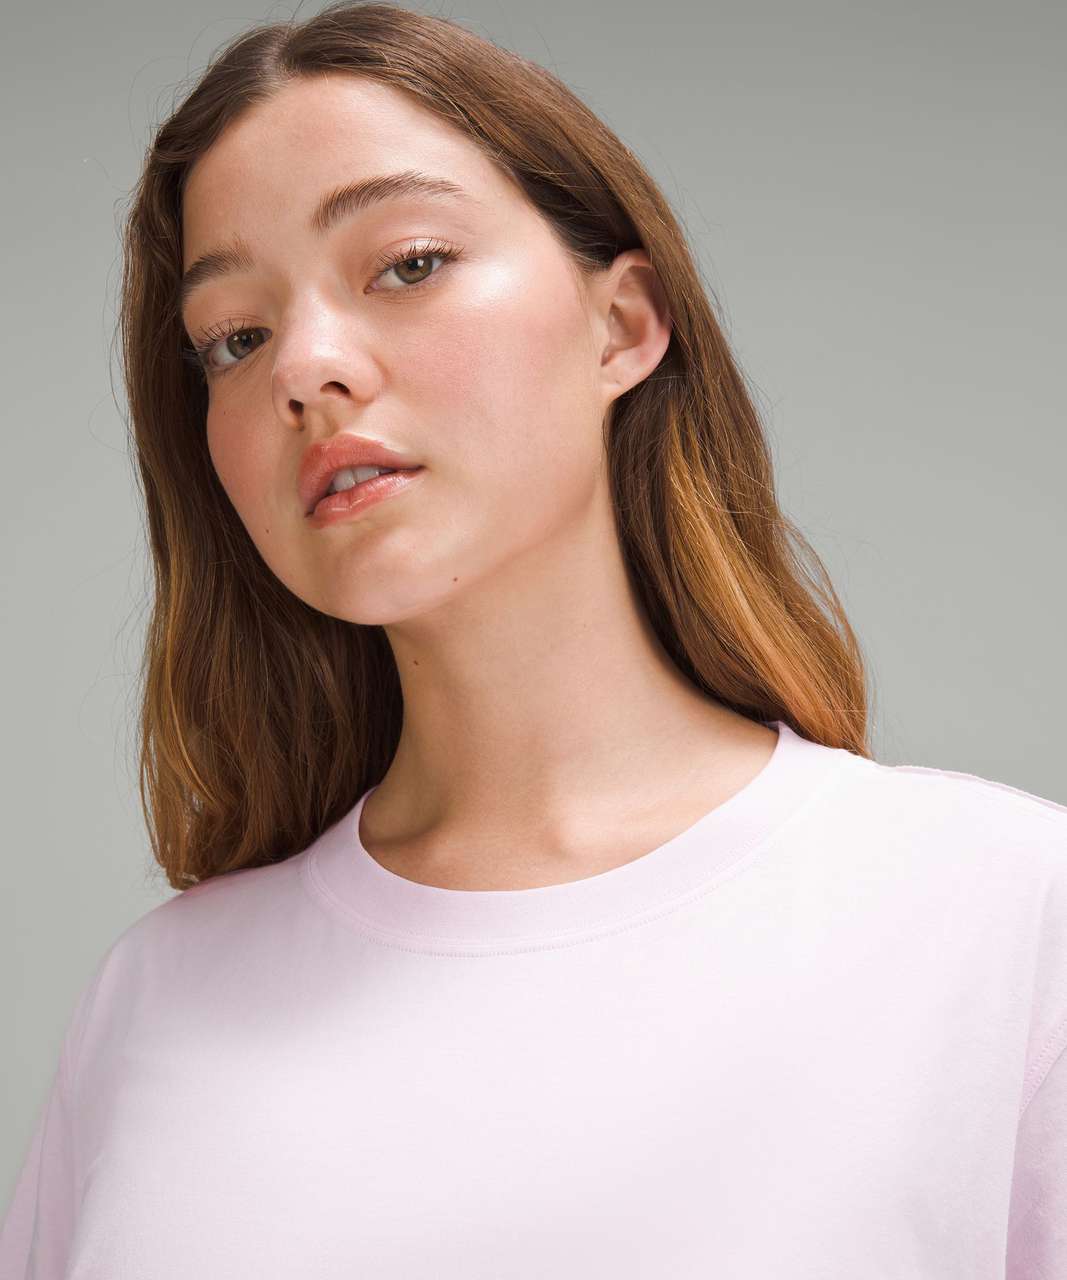 Lululemon All Yours Cotton T-Shirt - Meadowsweet Pink